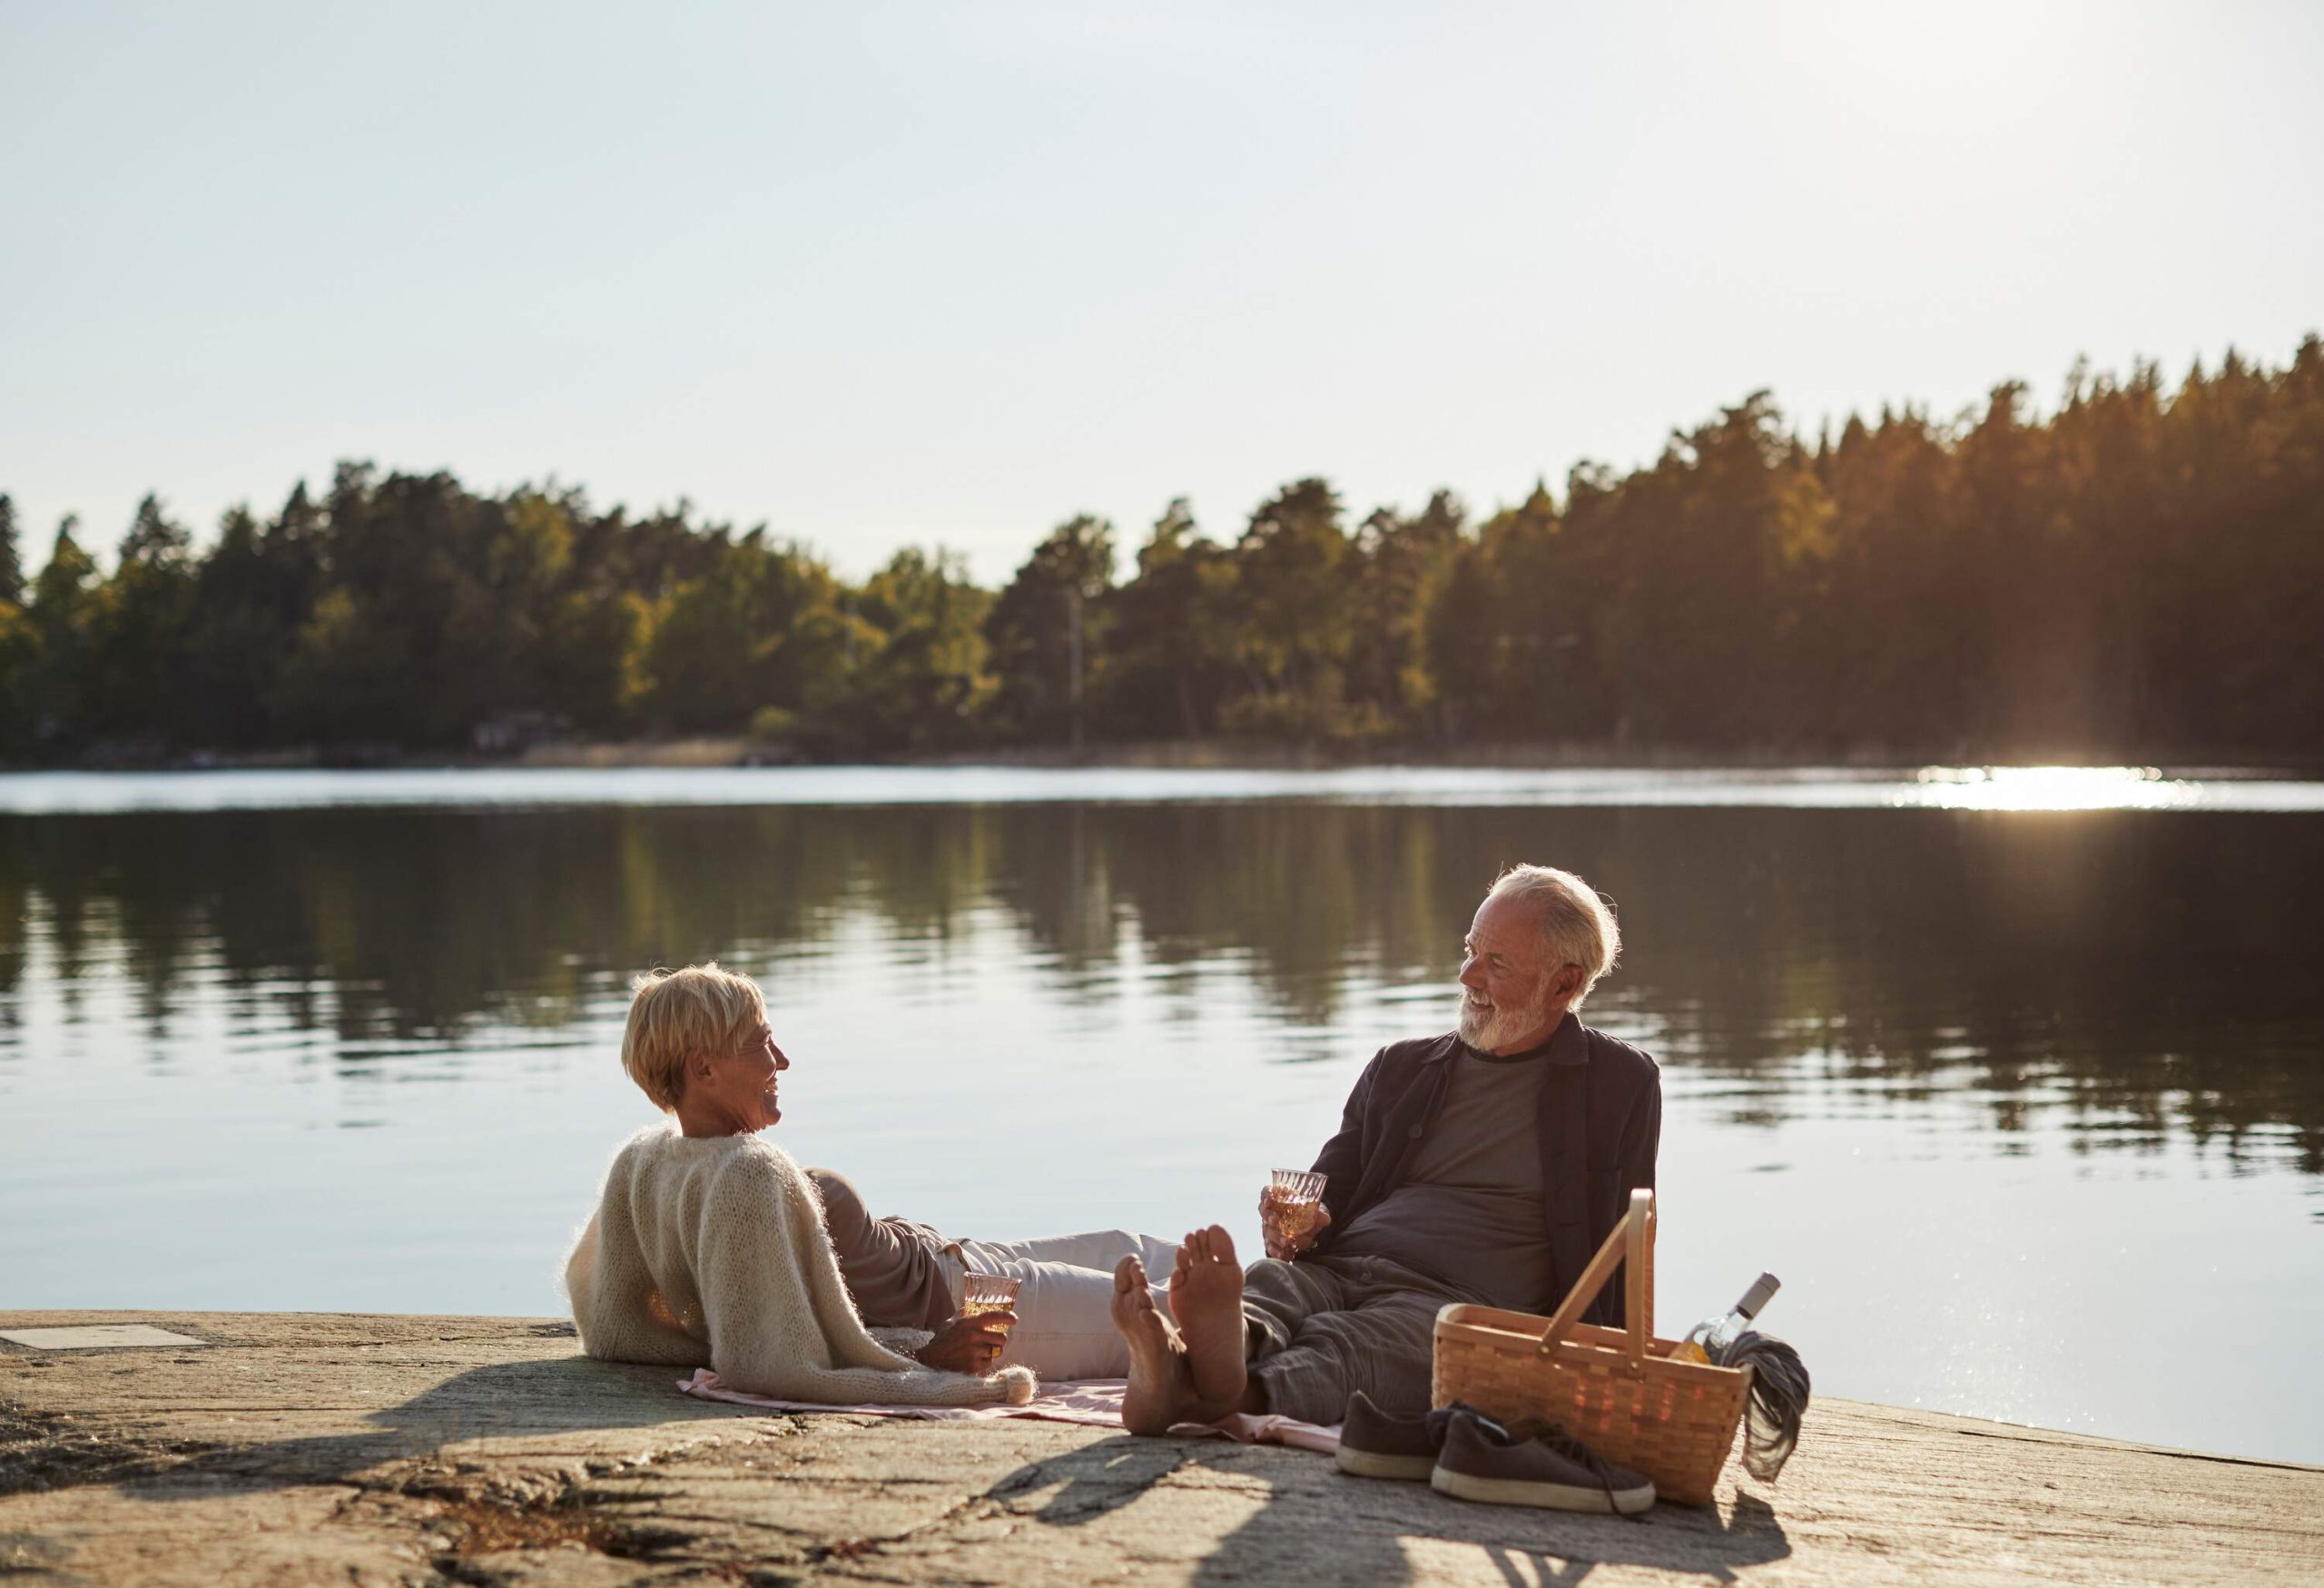 An elderly couple hanging out with a glass of drinks alongside a tranquil lake surrounded by trees.